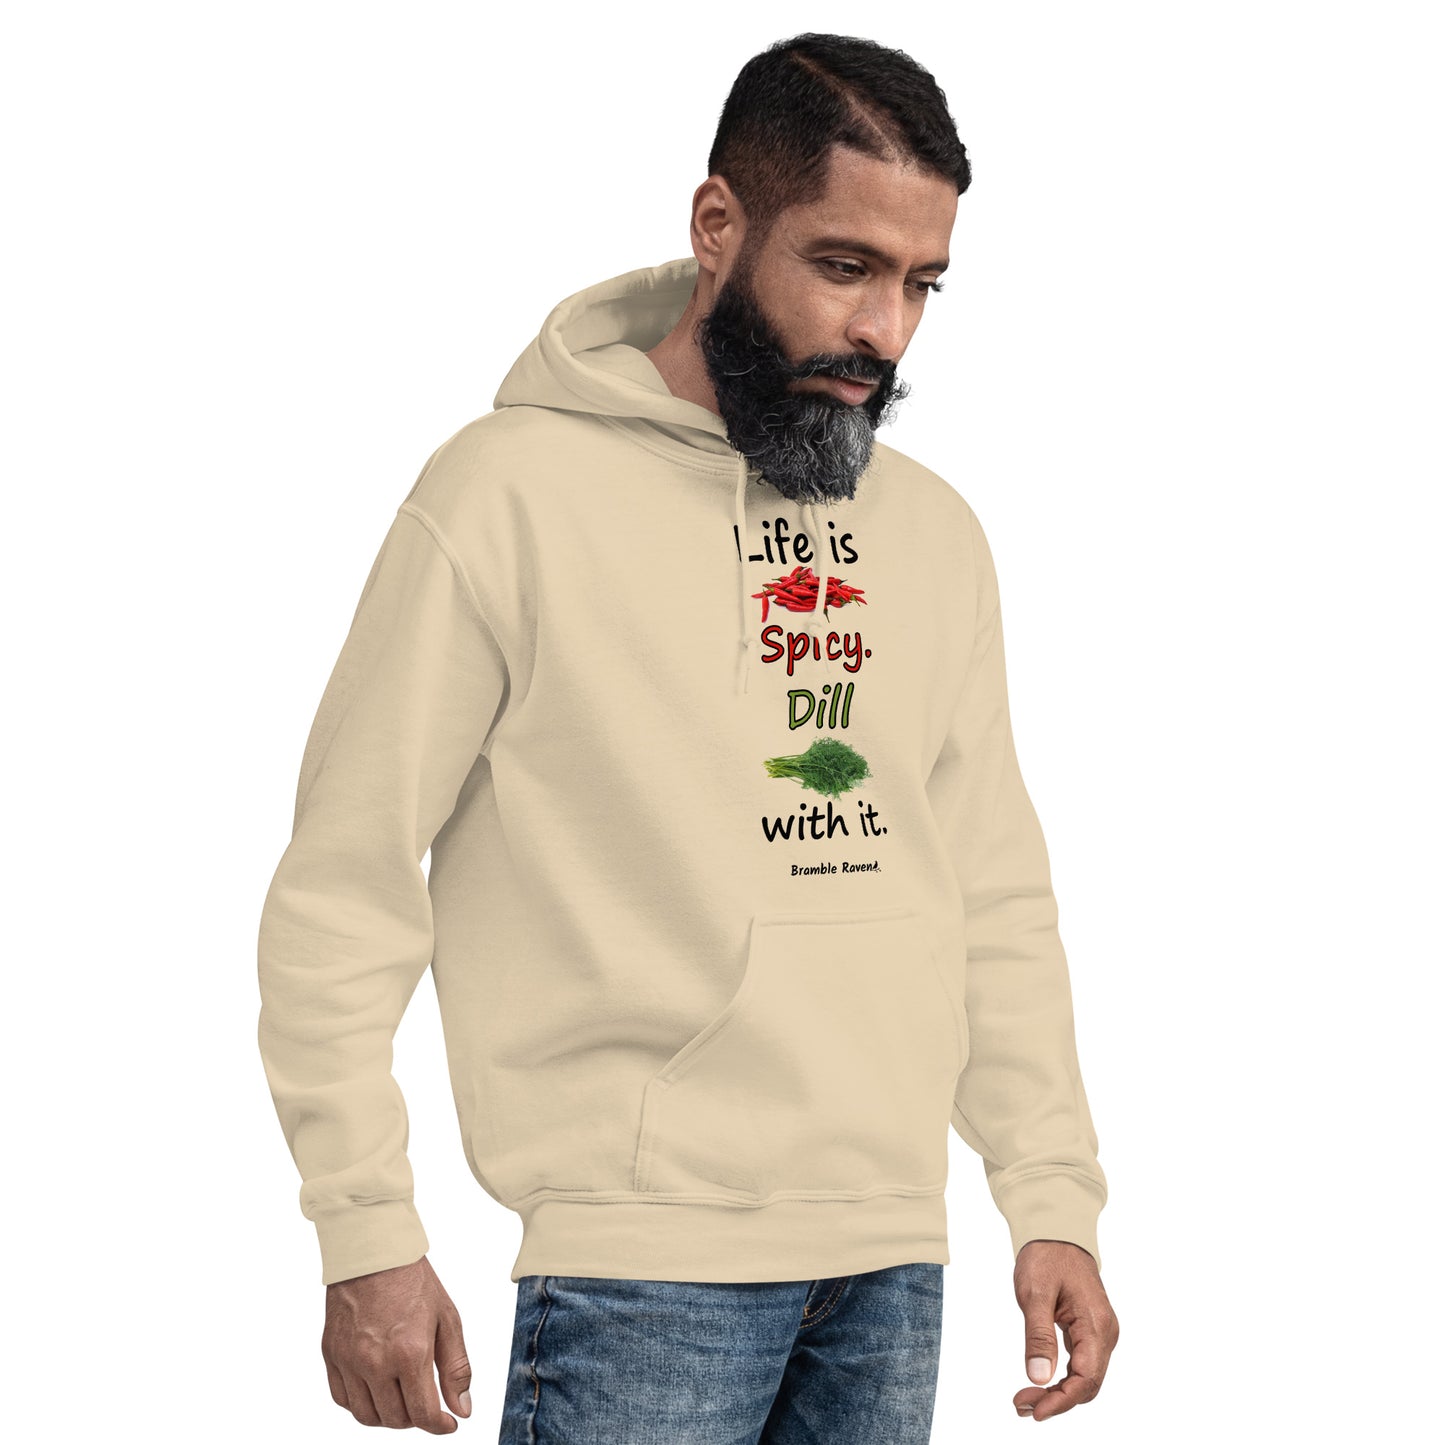 Sand colored unisex heavy blend hoodie.  Double lined hood, matching drawcord, front pouch pocket. Rib knit cuffs and waistband. Features text and image: Life is spicy. Dill with it.  Shown on male model facing right.